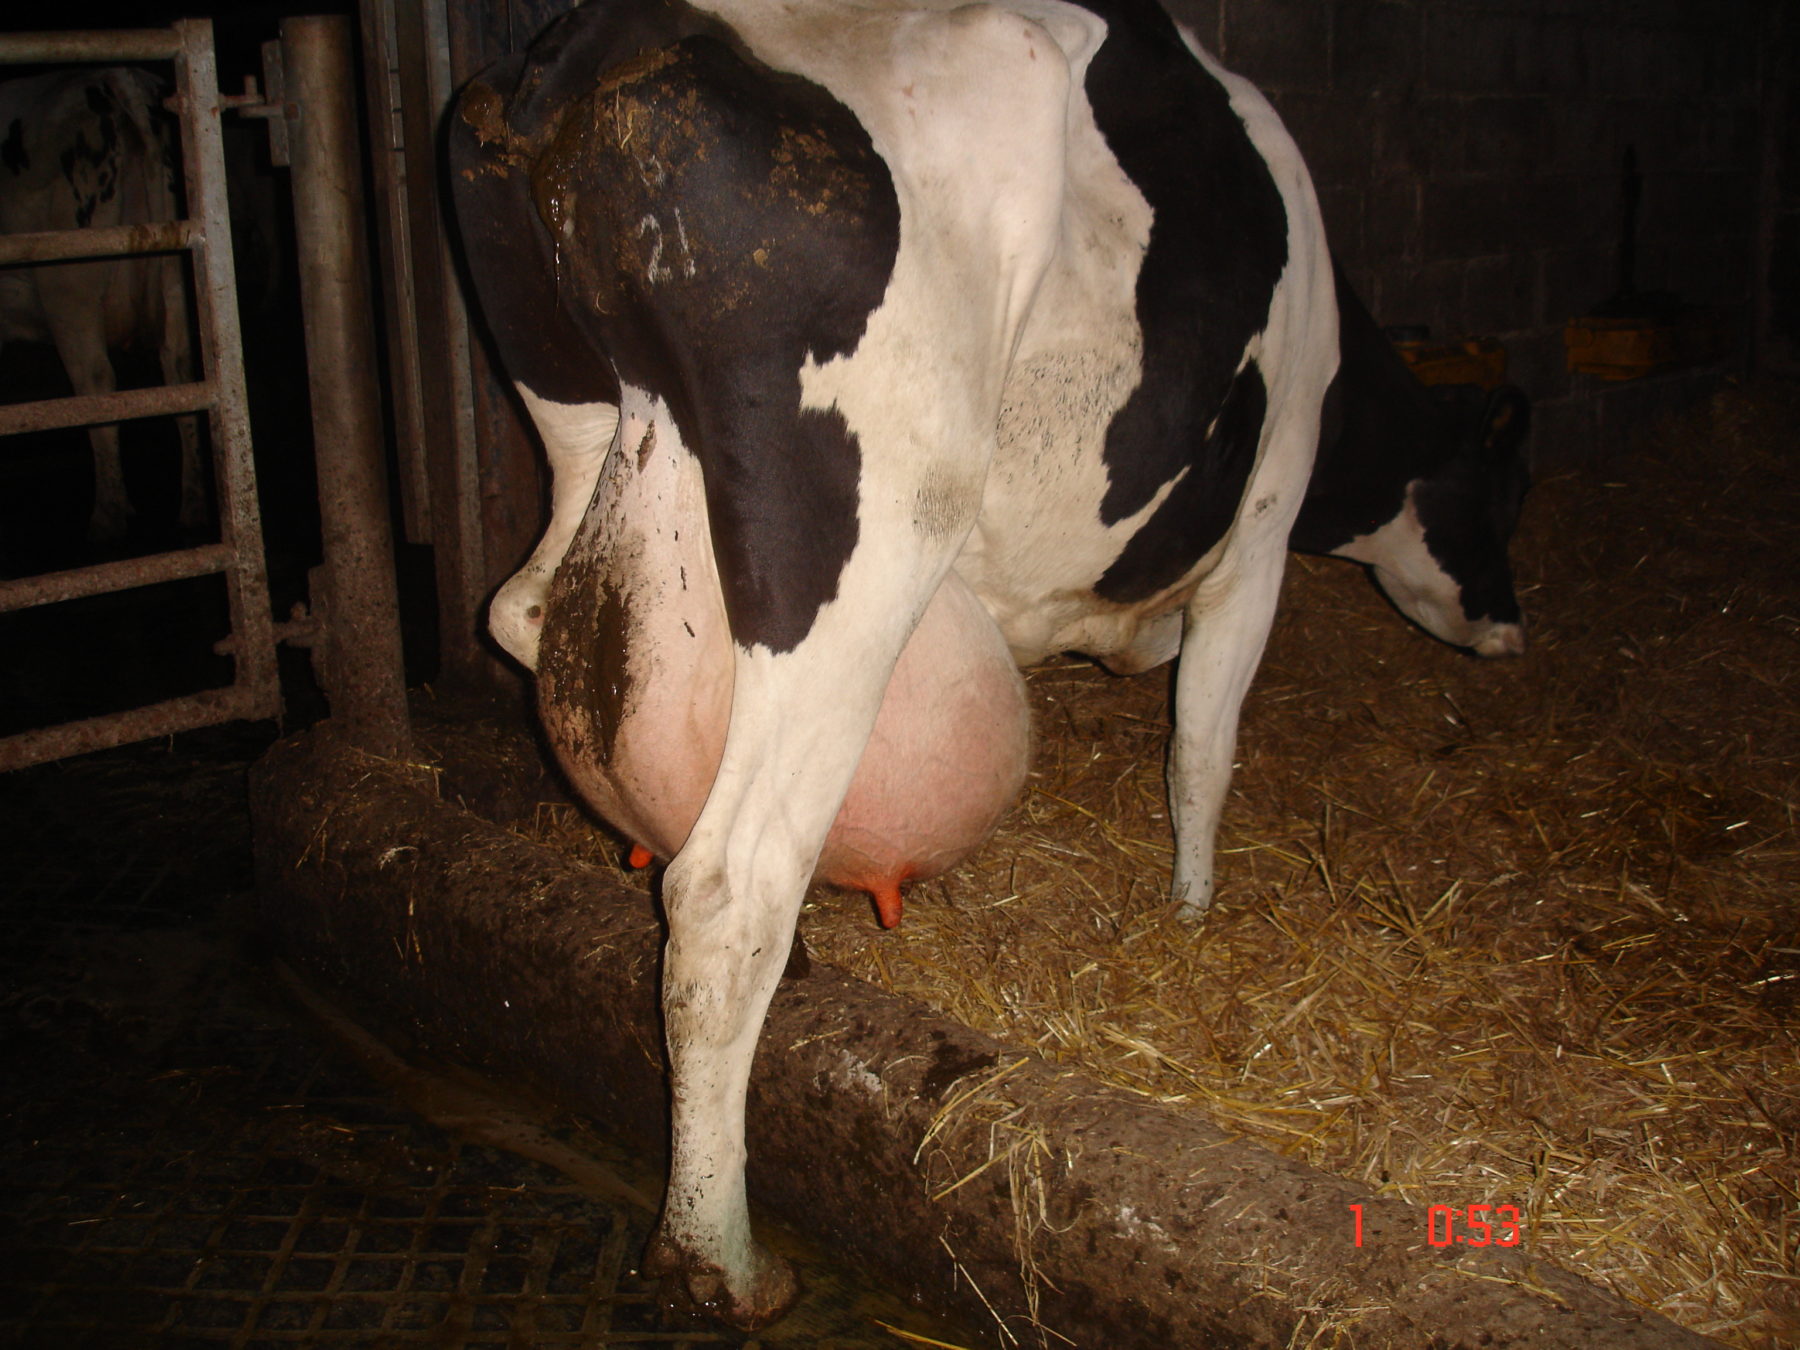 A cow farmed for milk with huge udders due to mastitis